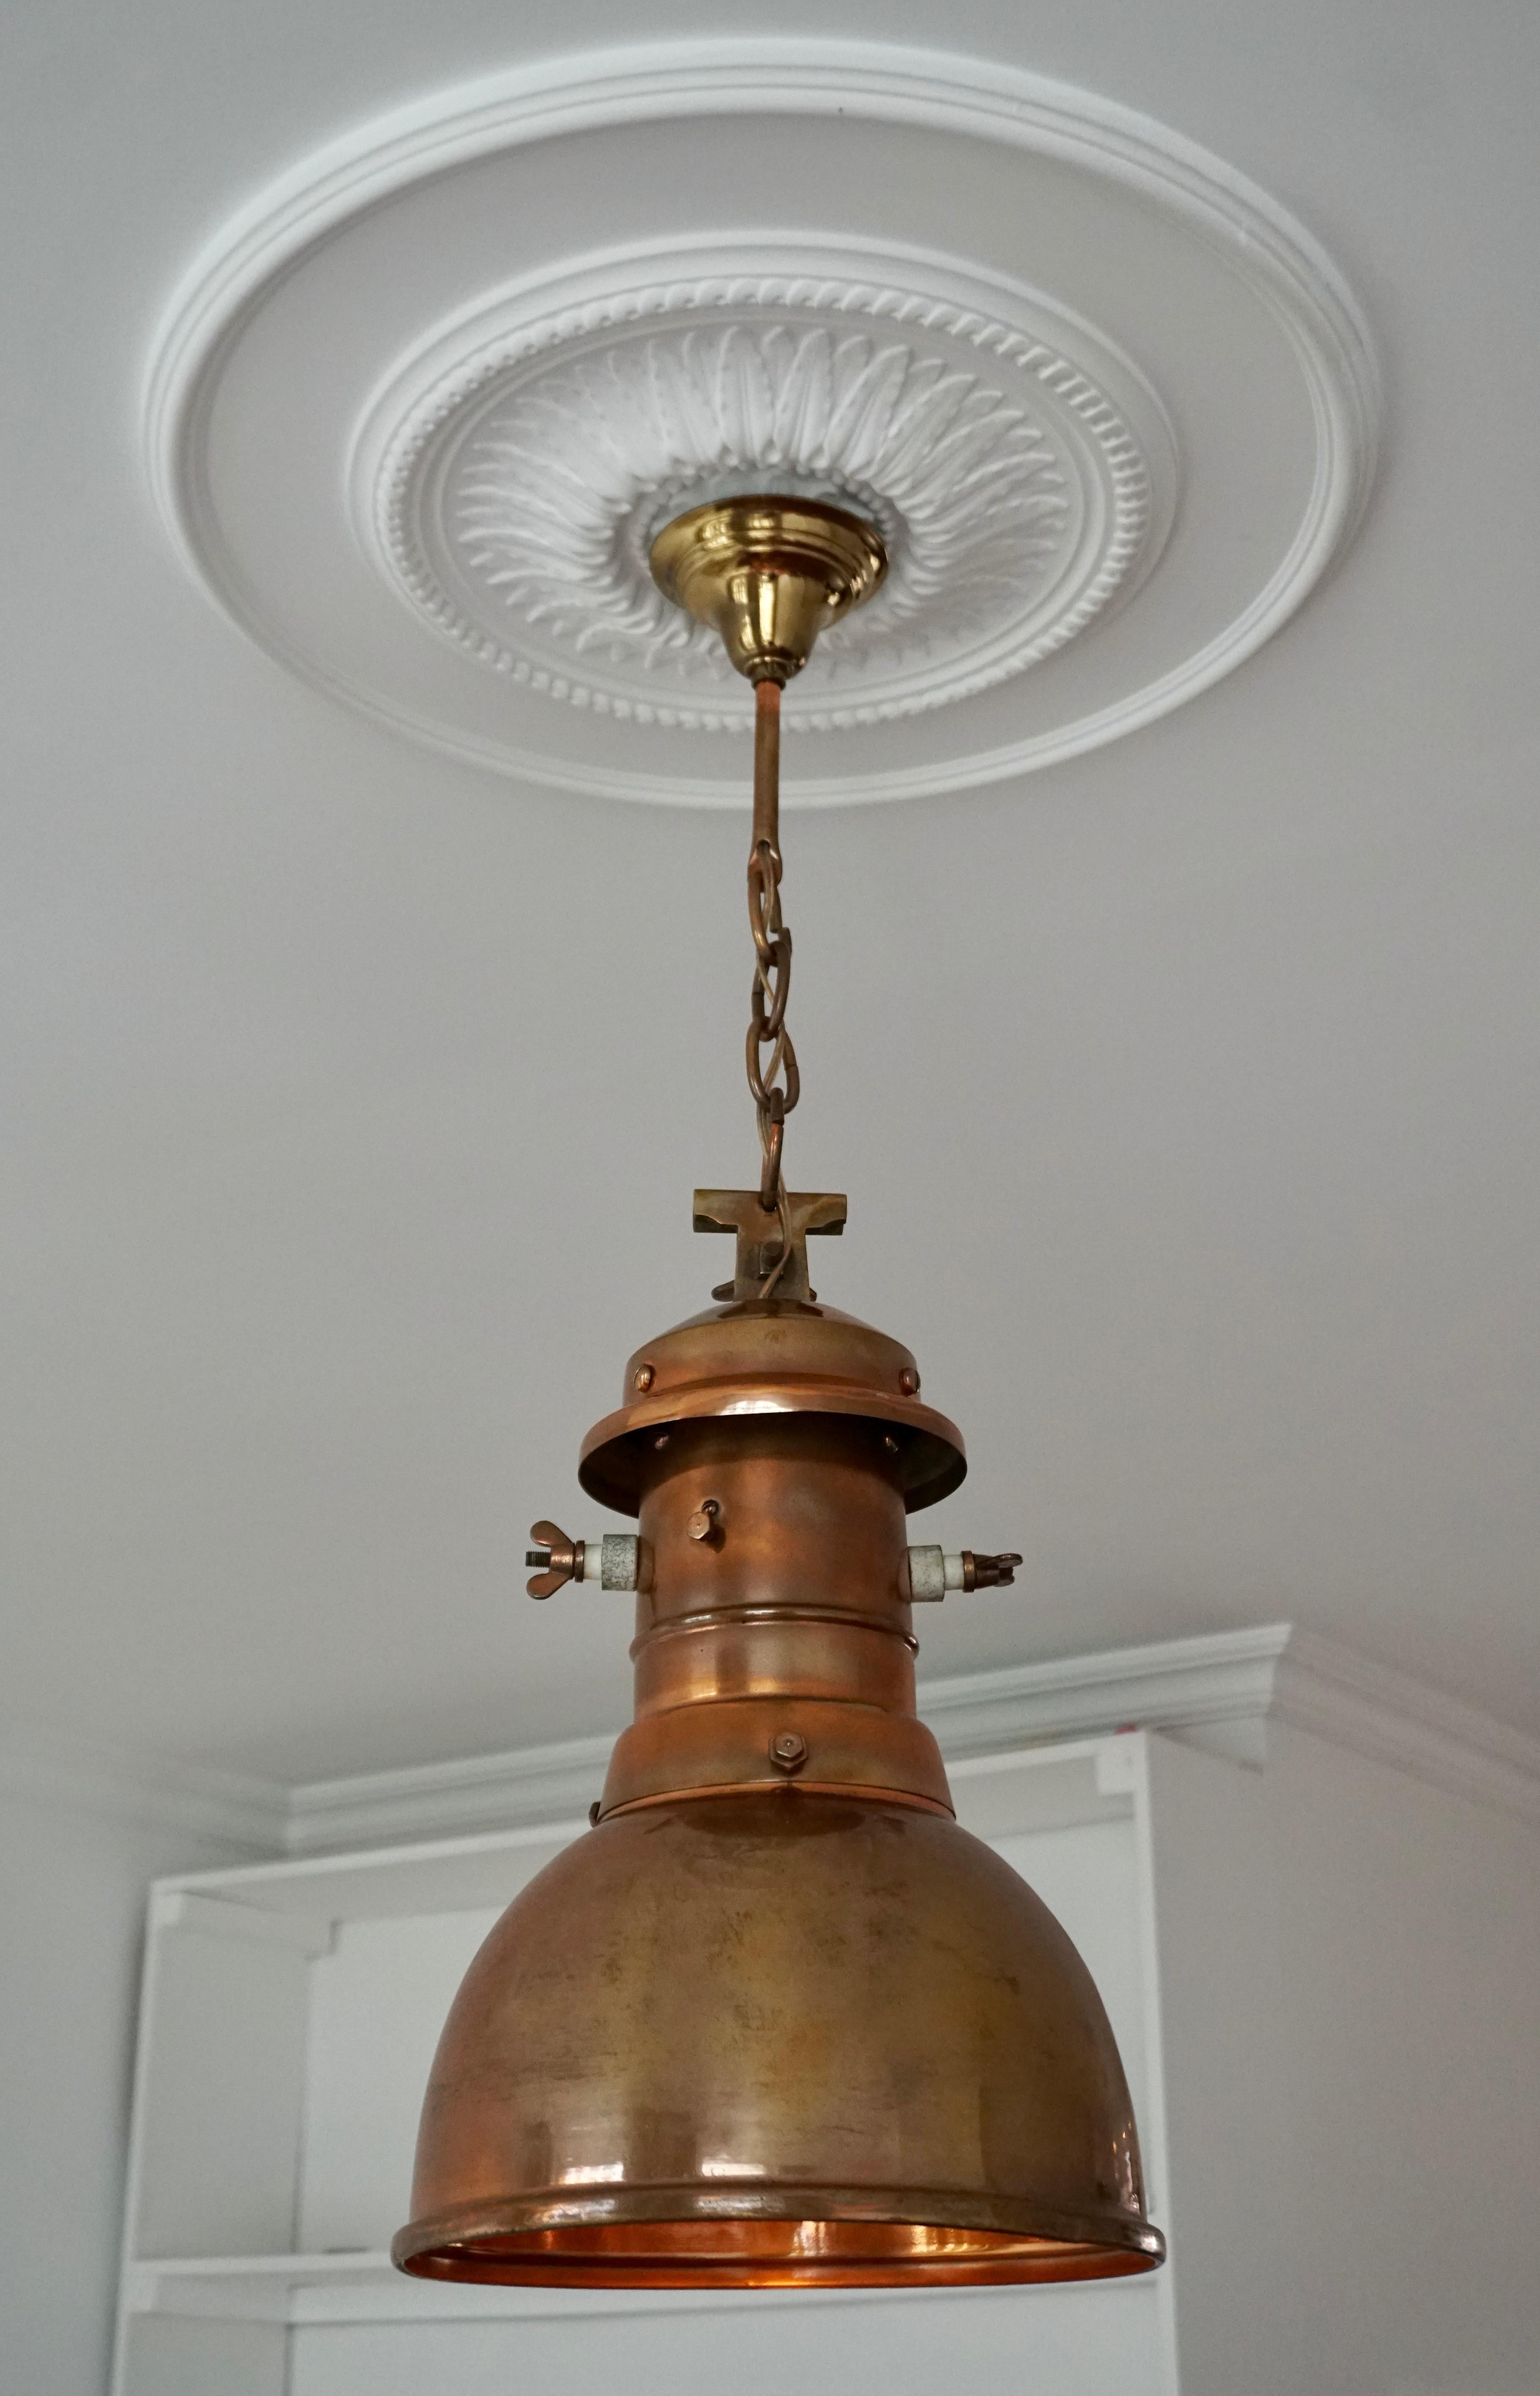 Beautiful antique street gas lantern converted to electric.

It does not matter whether you are decorating an Art Deco, a Mid-Century Modern or a contemporary home or office, if you have the right space for it then this stunning, timeless and